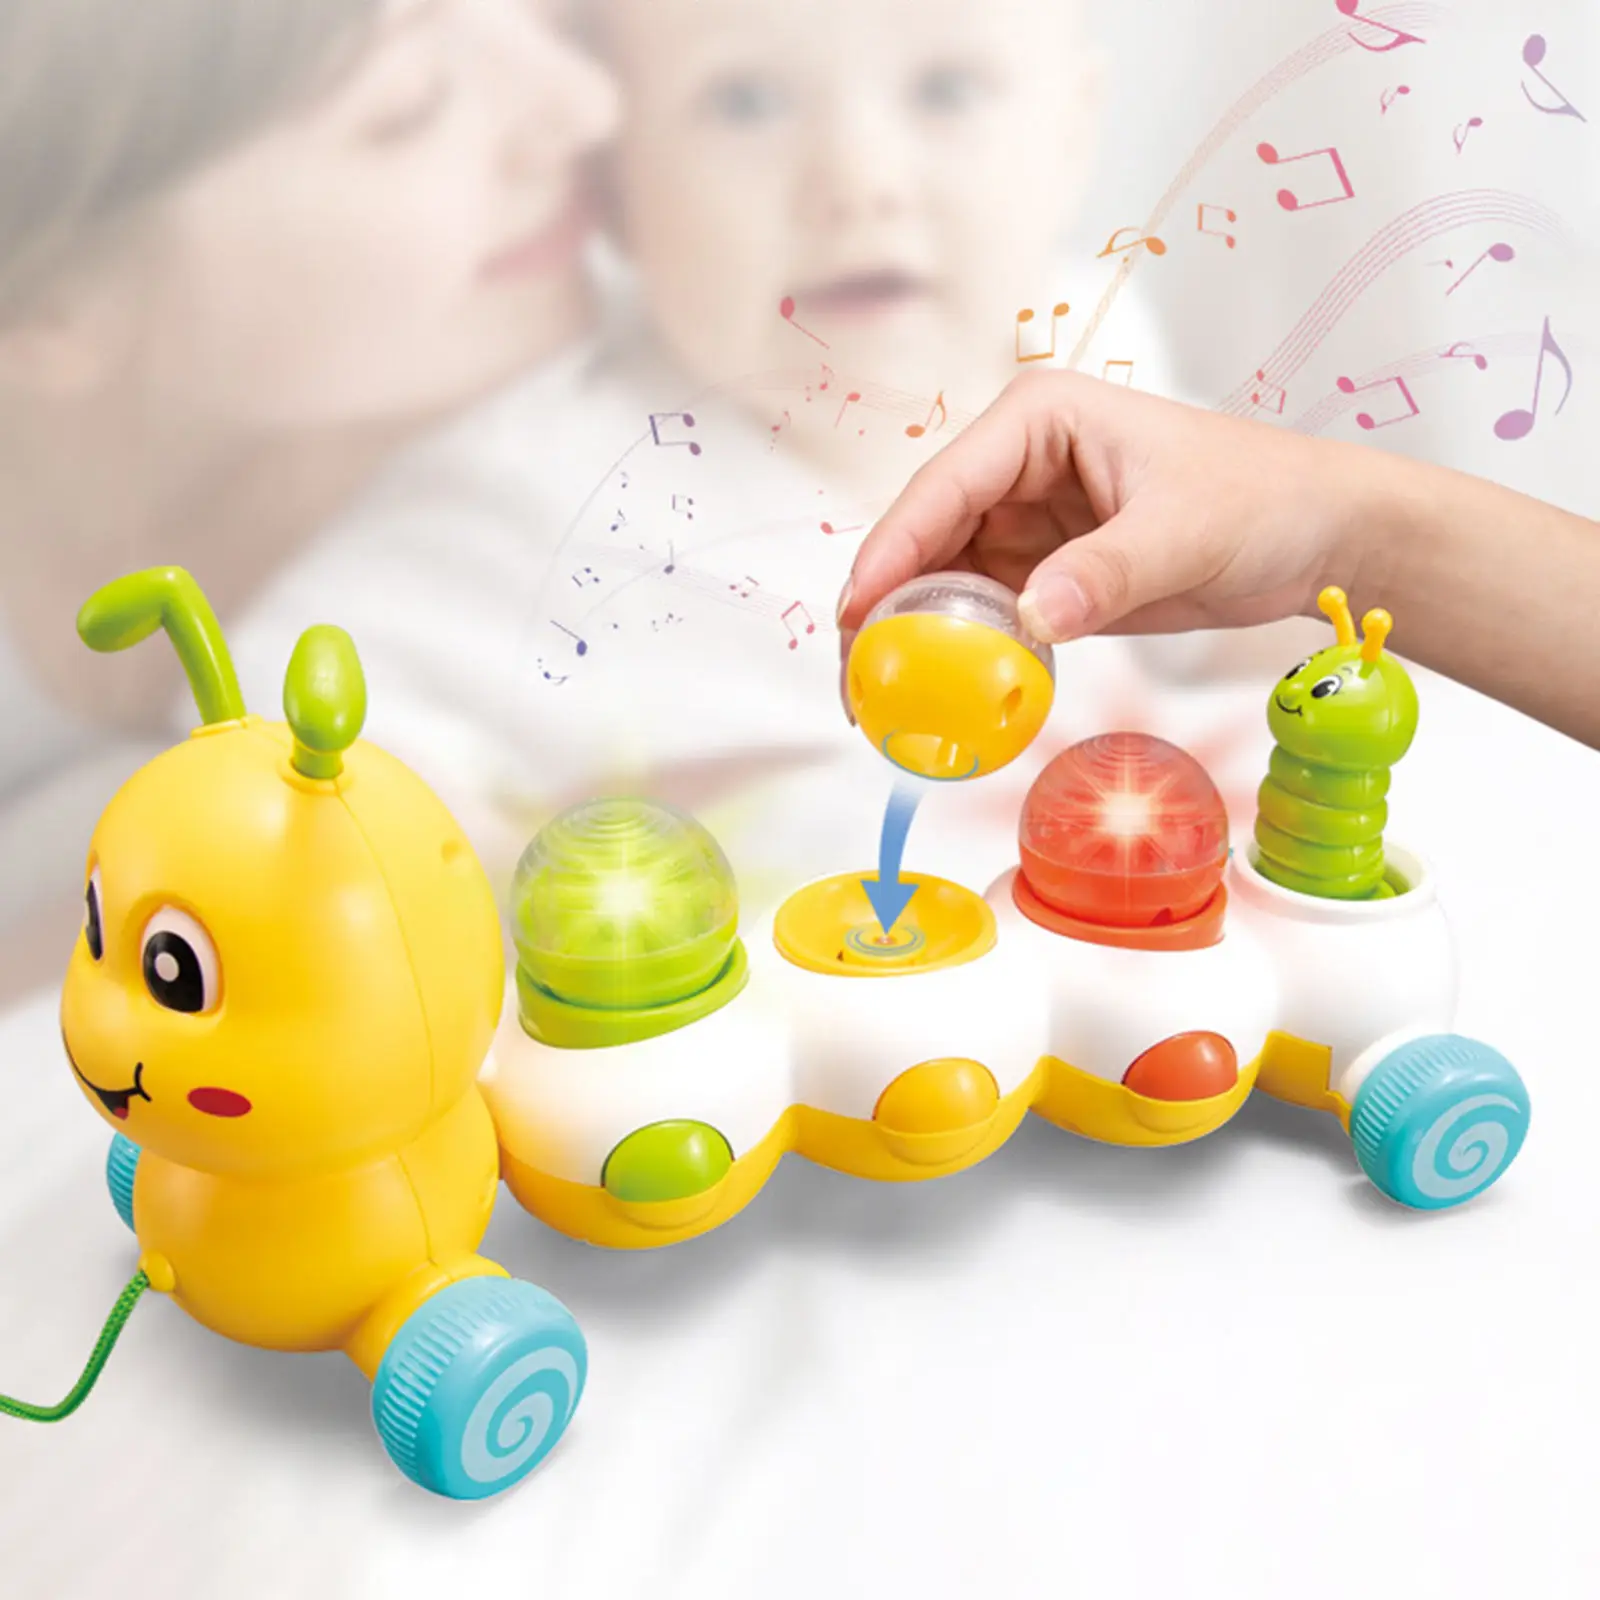 Electric Animal Caterpillar Kids Toy With Lights and Sound for Children Funny Novelty Gift Early Learning Toys